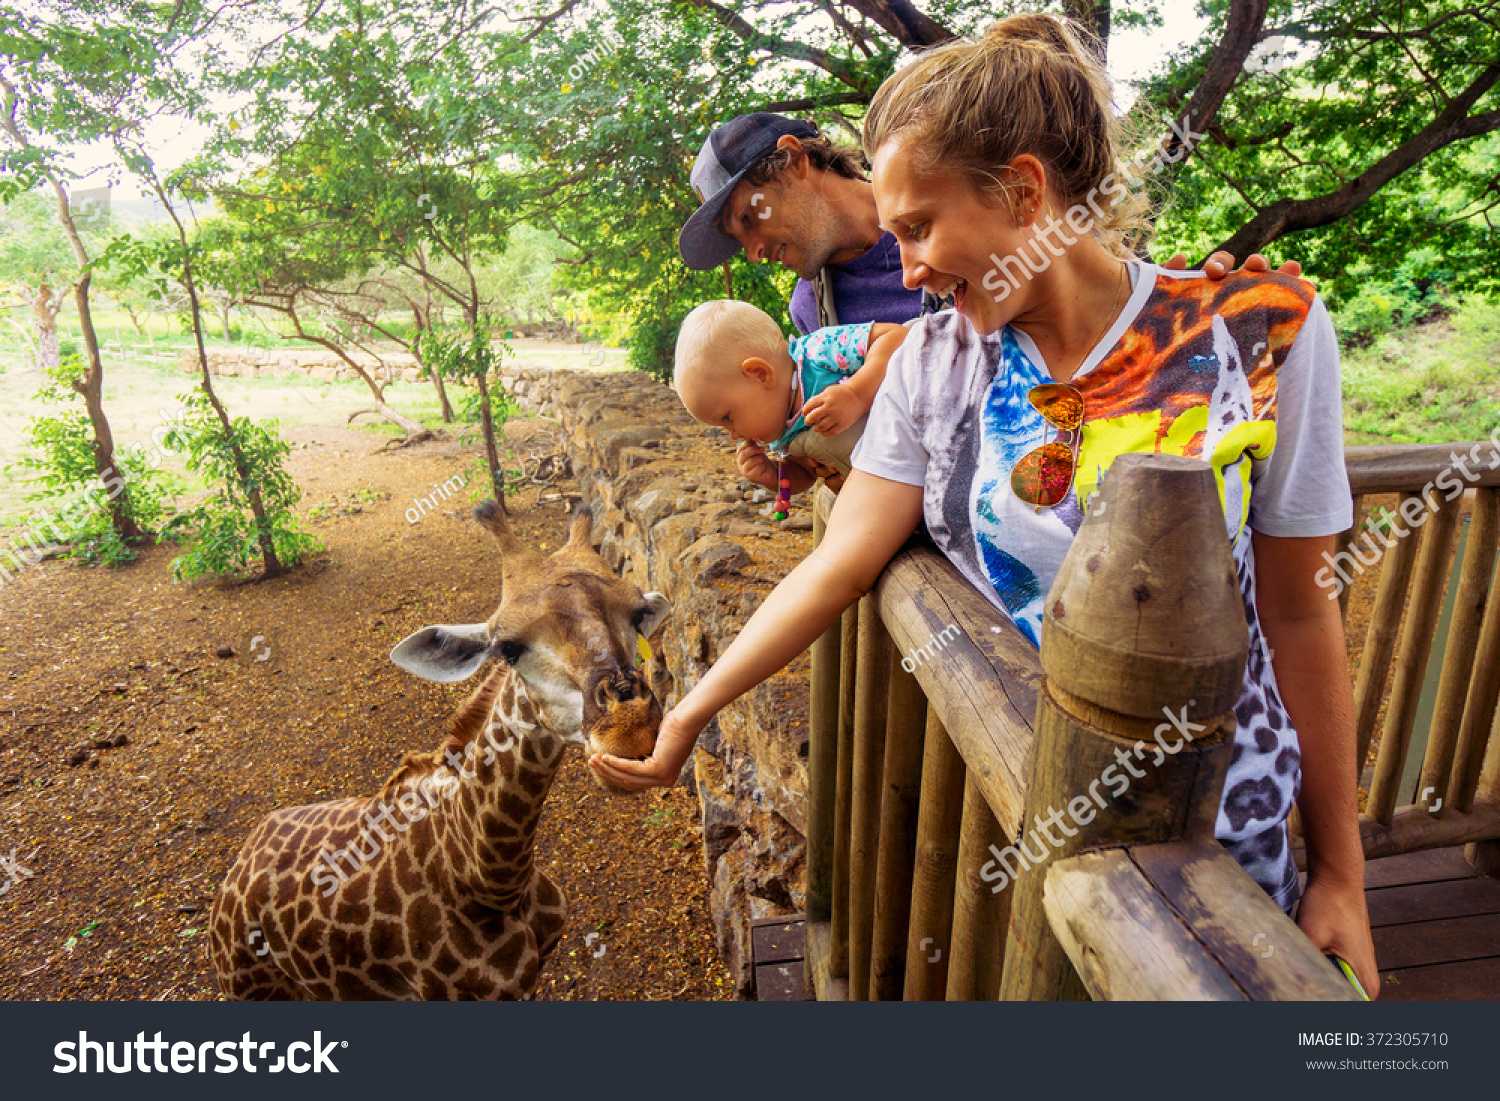 young couple with a baby feeding a giraffe at the zoo on a jungle background. The child laughs. Mauritius Casela Safari Park #372305710